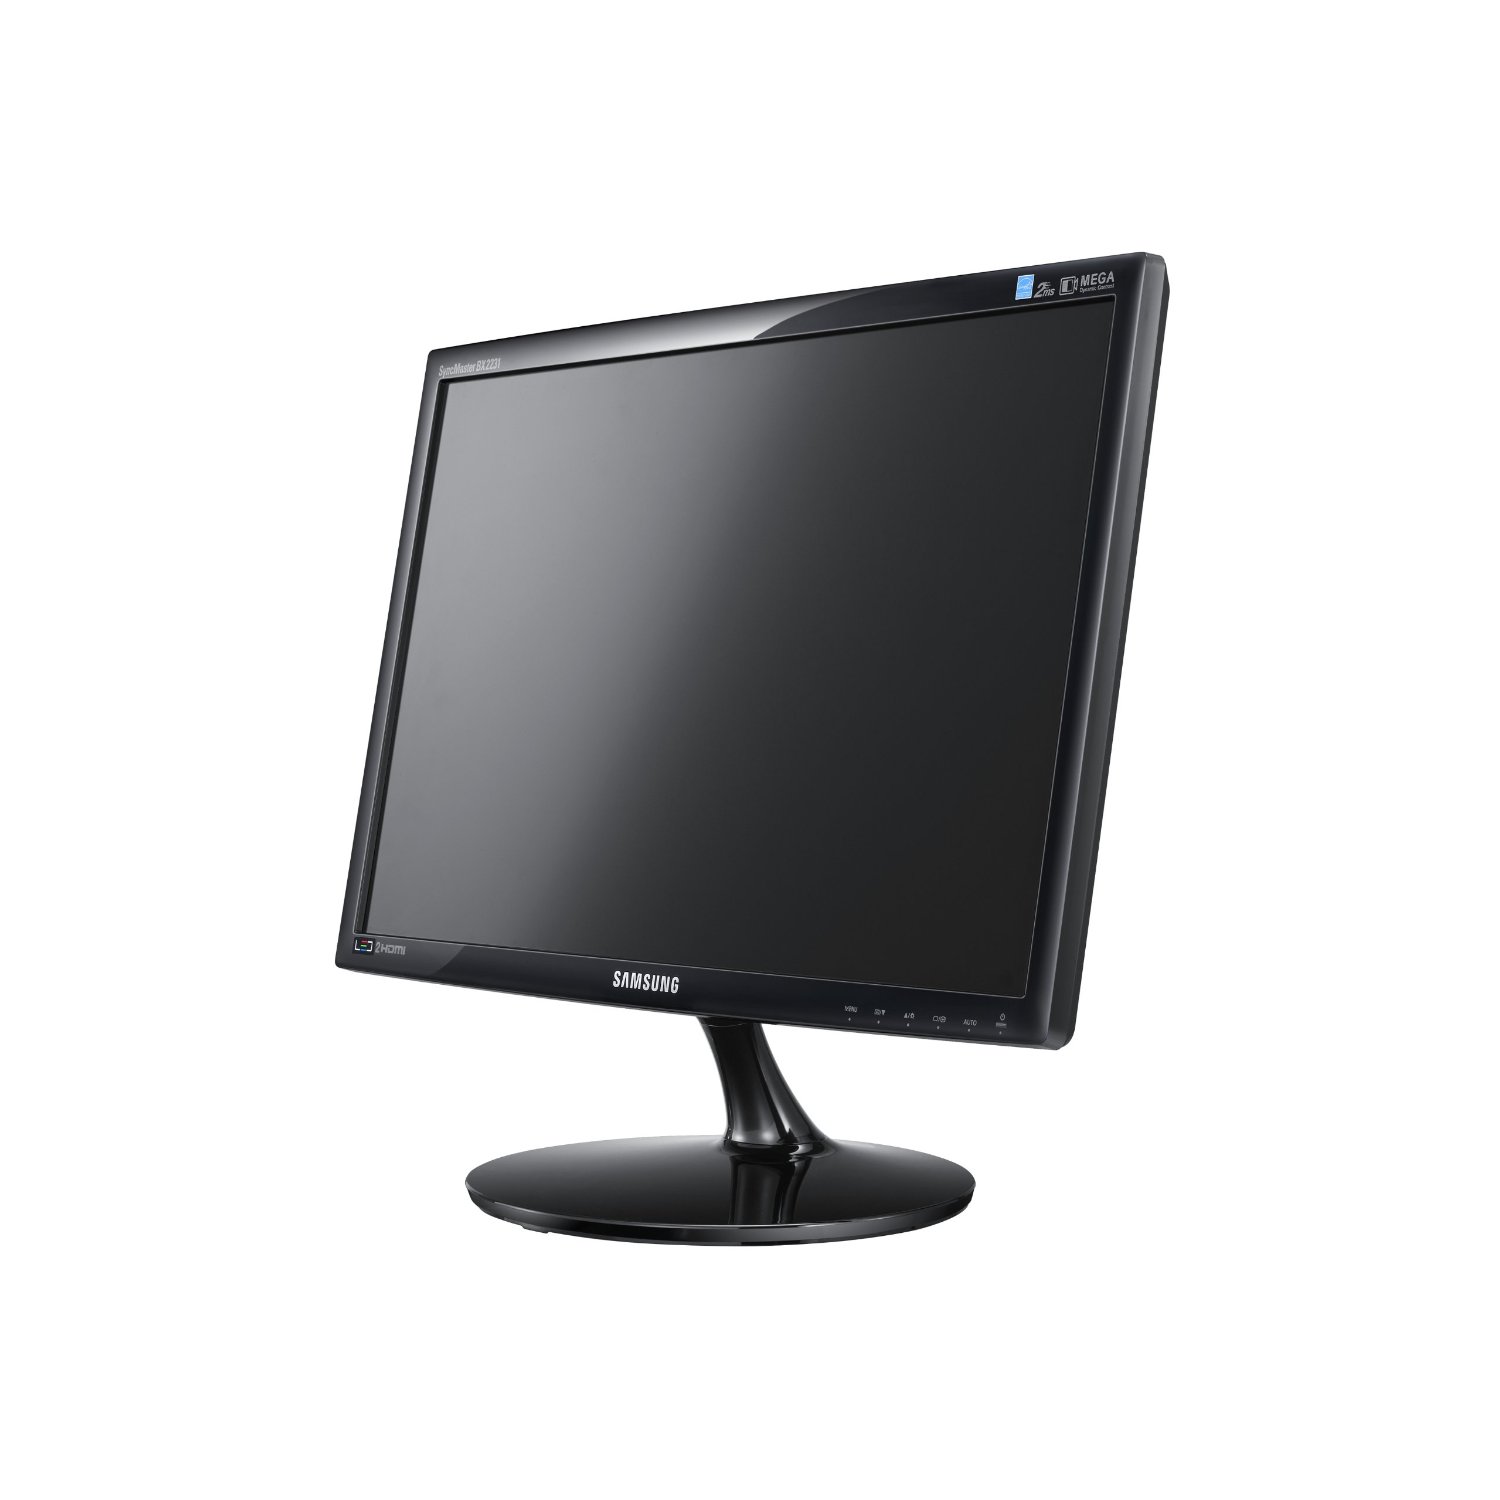 http://thetechjournal.com/wp-content/uploads/images/1110/1317958145-samsung-bx2231-215inch-widescreen-ledbacklit-lcd-monitor-1.jpg